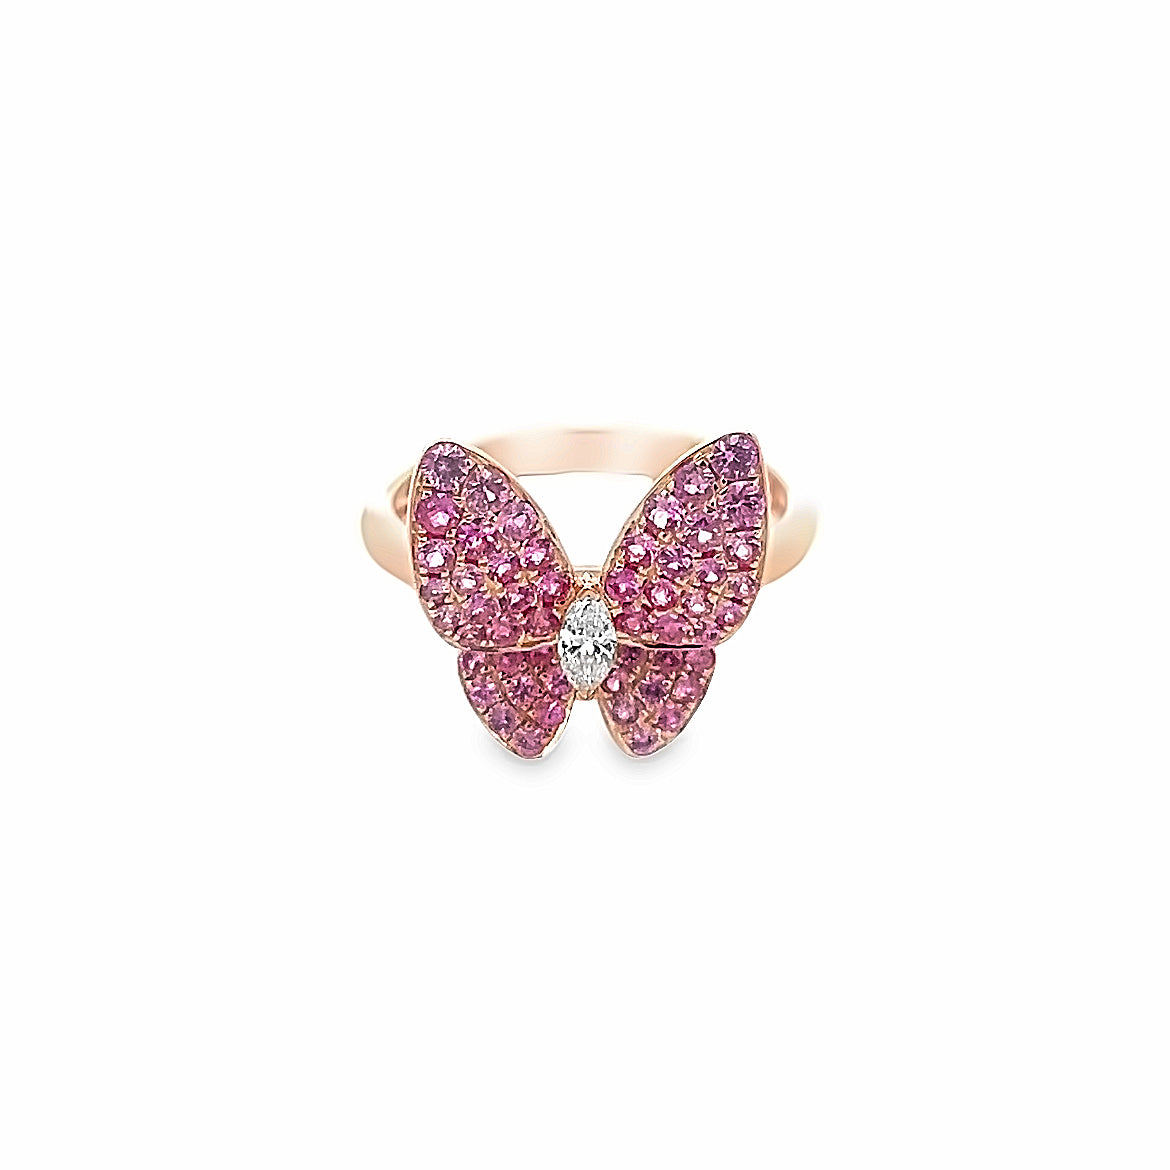 18K ROSE GOLD RING WITH PINK SAPPHIRE